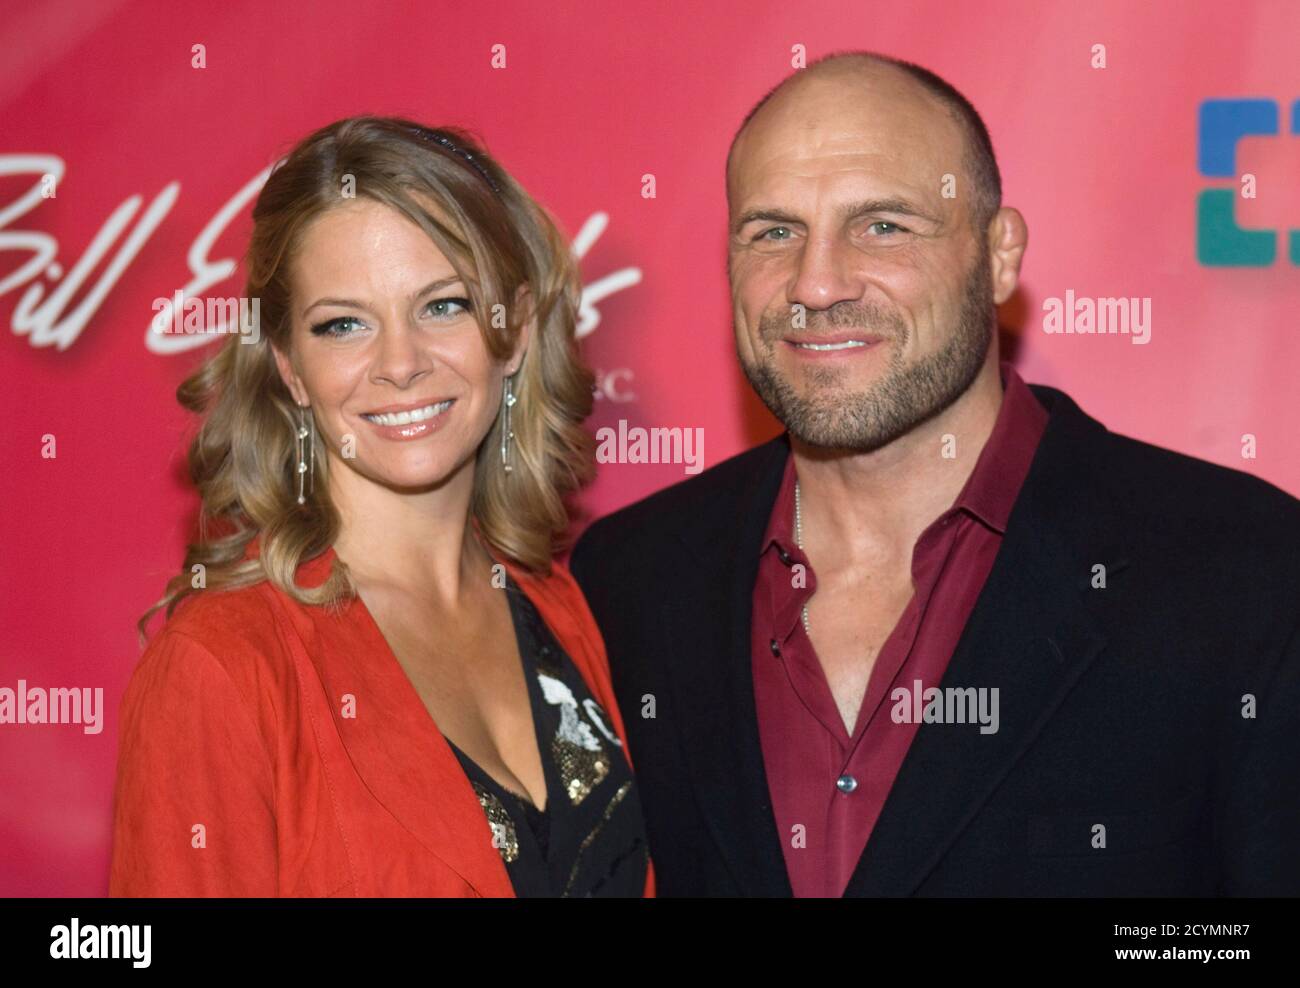 Annie Stanley and former mixed martial arts champion Randy Couture arrive for the 16th annual Keep Memory Alive 'Power of Love Gala' and 70th birthday celebration for Muhammad Ali at the MGM Grand Garden Arena in Las Vegas, Nevada February 18, 2012. Proceeds from the event benefit the Cleveland Clinic Lou Ruvo Center for Brain Health in Las Vegas and the Muhammad Ali Center in Louisville, Kentucky. REUTERS/Steve Marcus (UNITED STATES - Tags: ENTERTAINMENT SPORT BOXING) Stock Photo